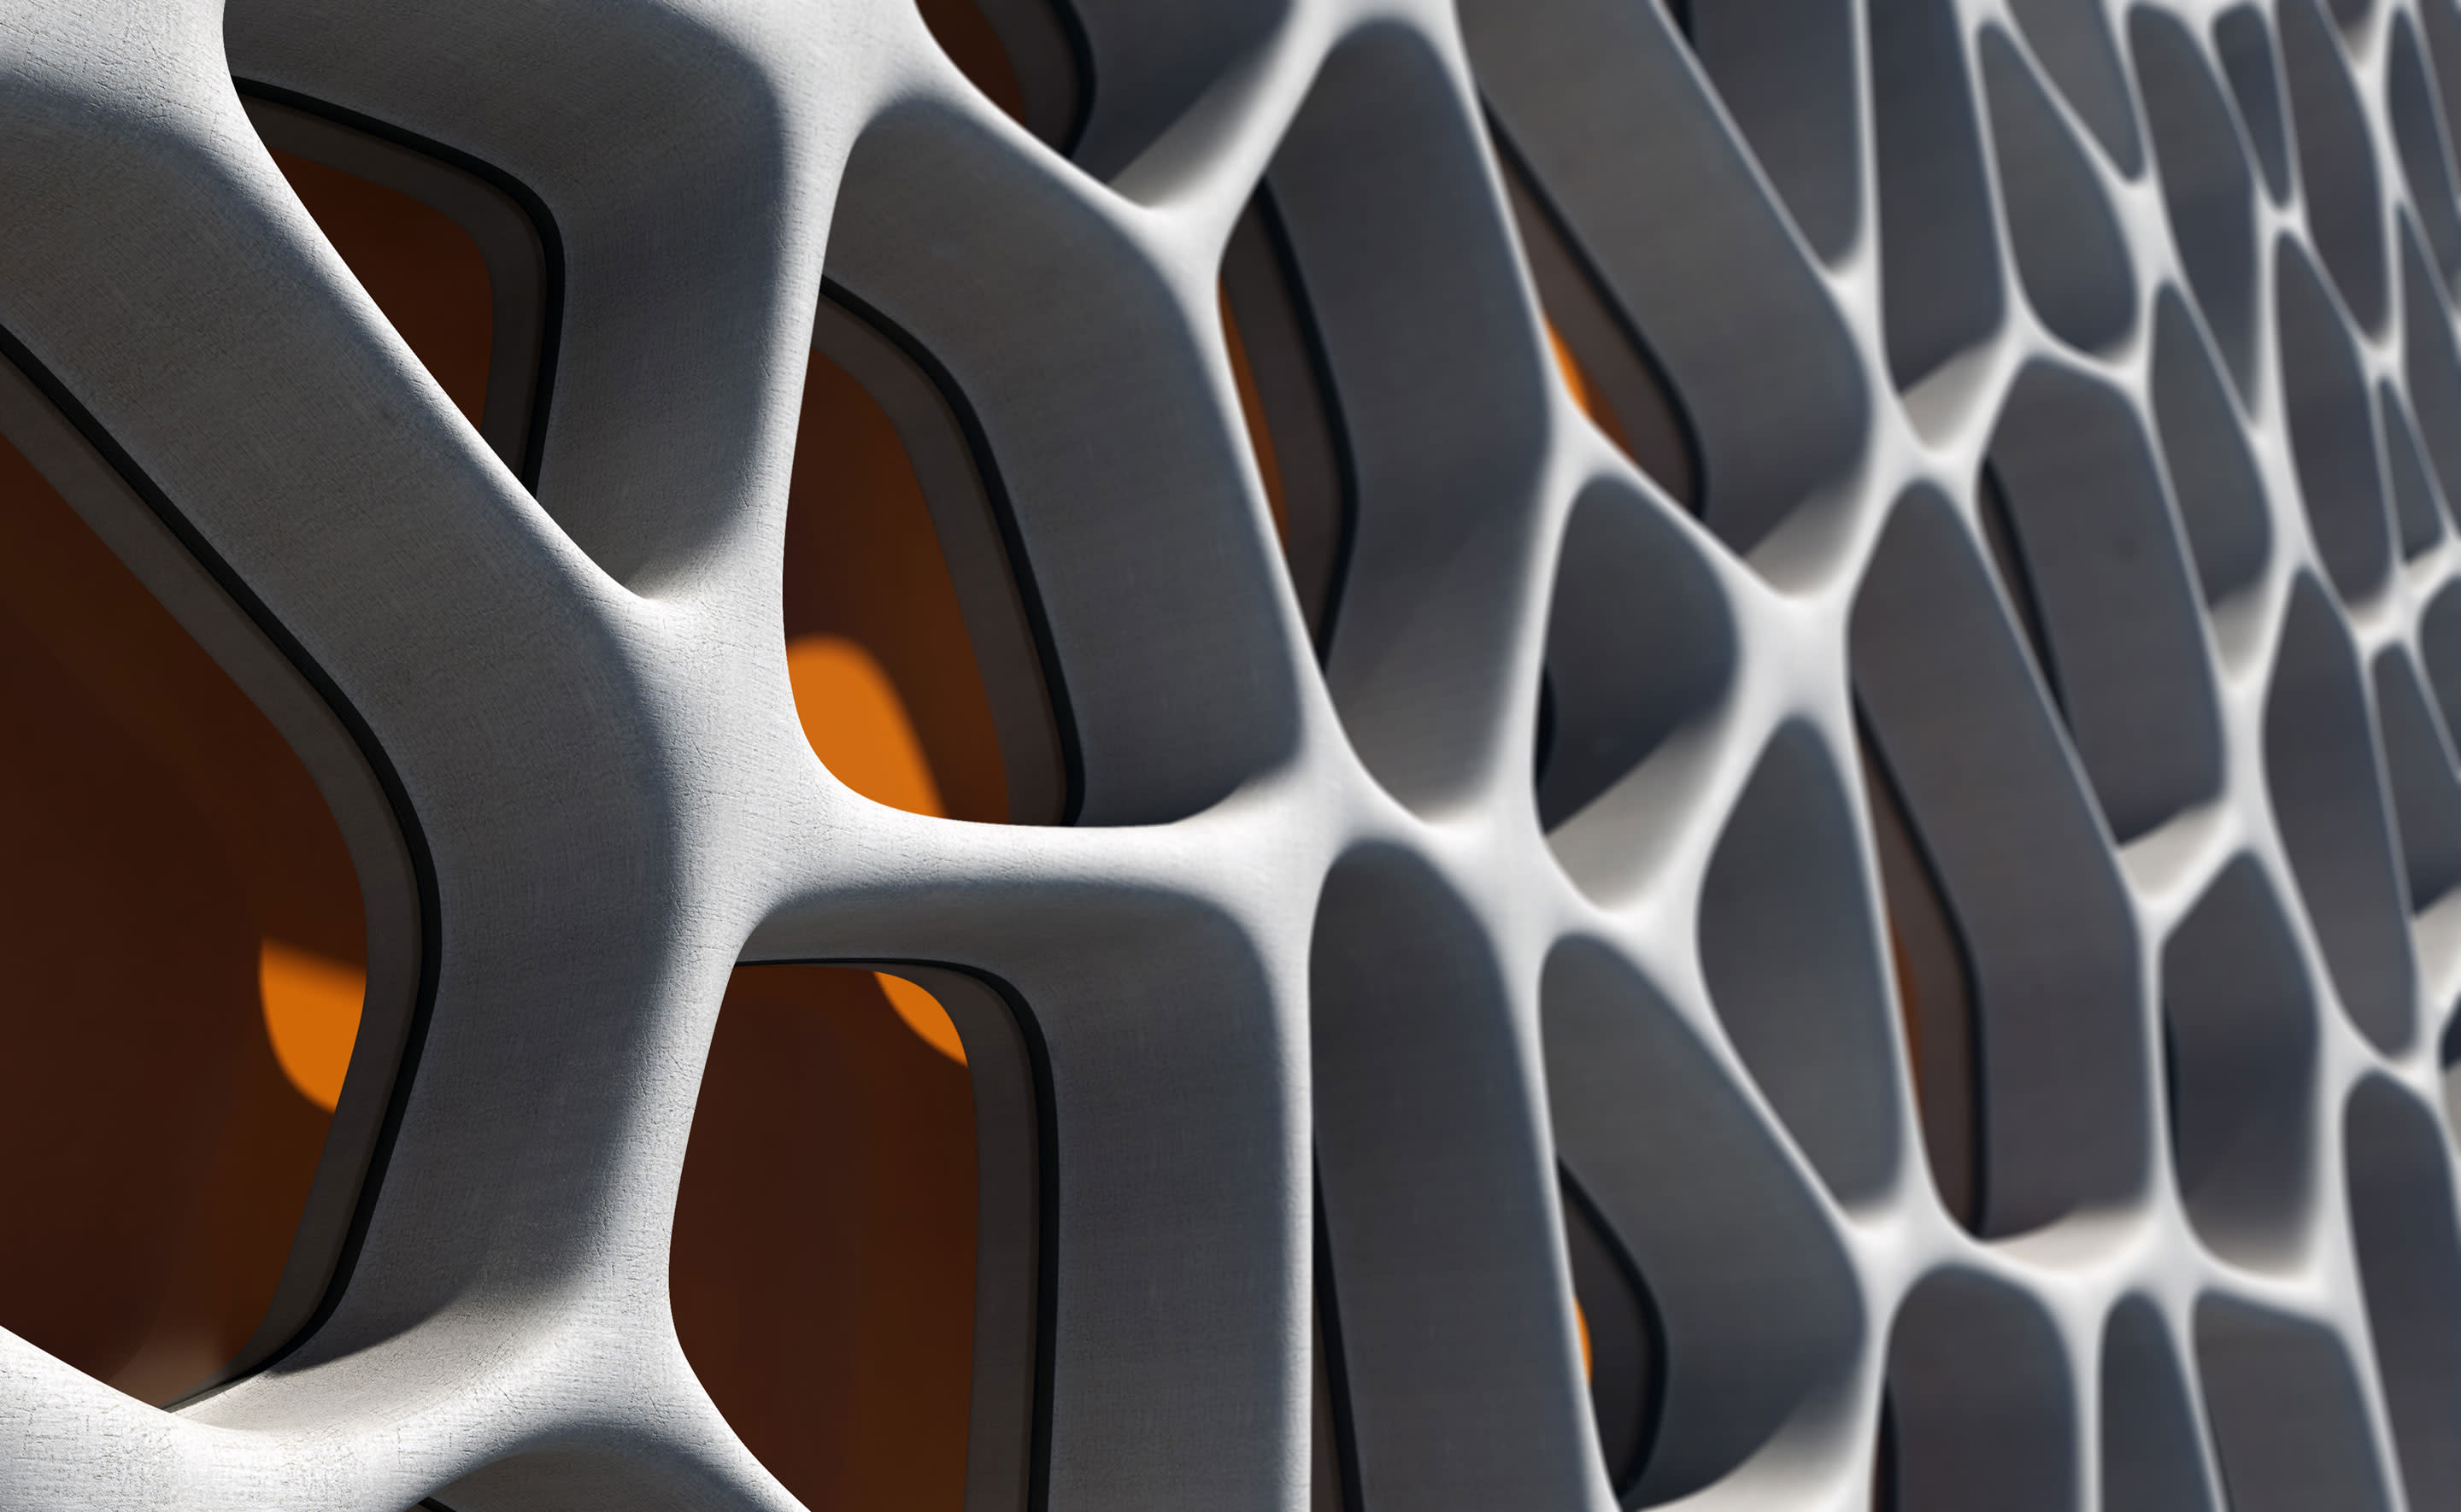 Image: 3D model of a generative design in the form of a honeycomb wall